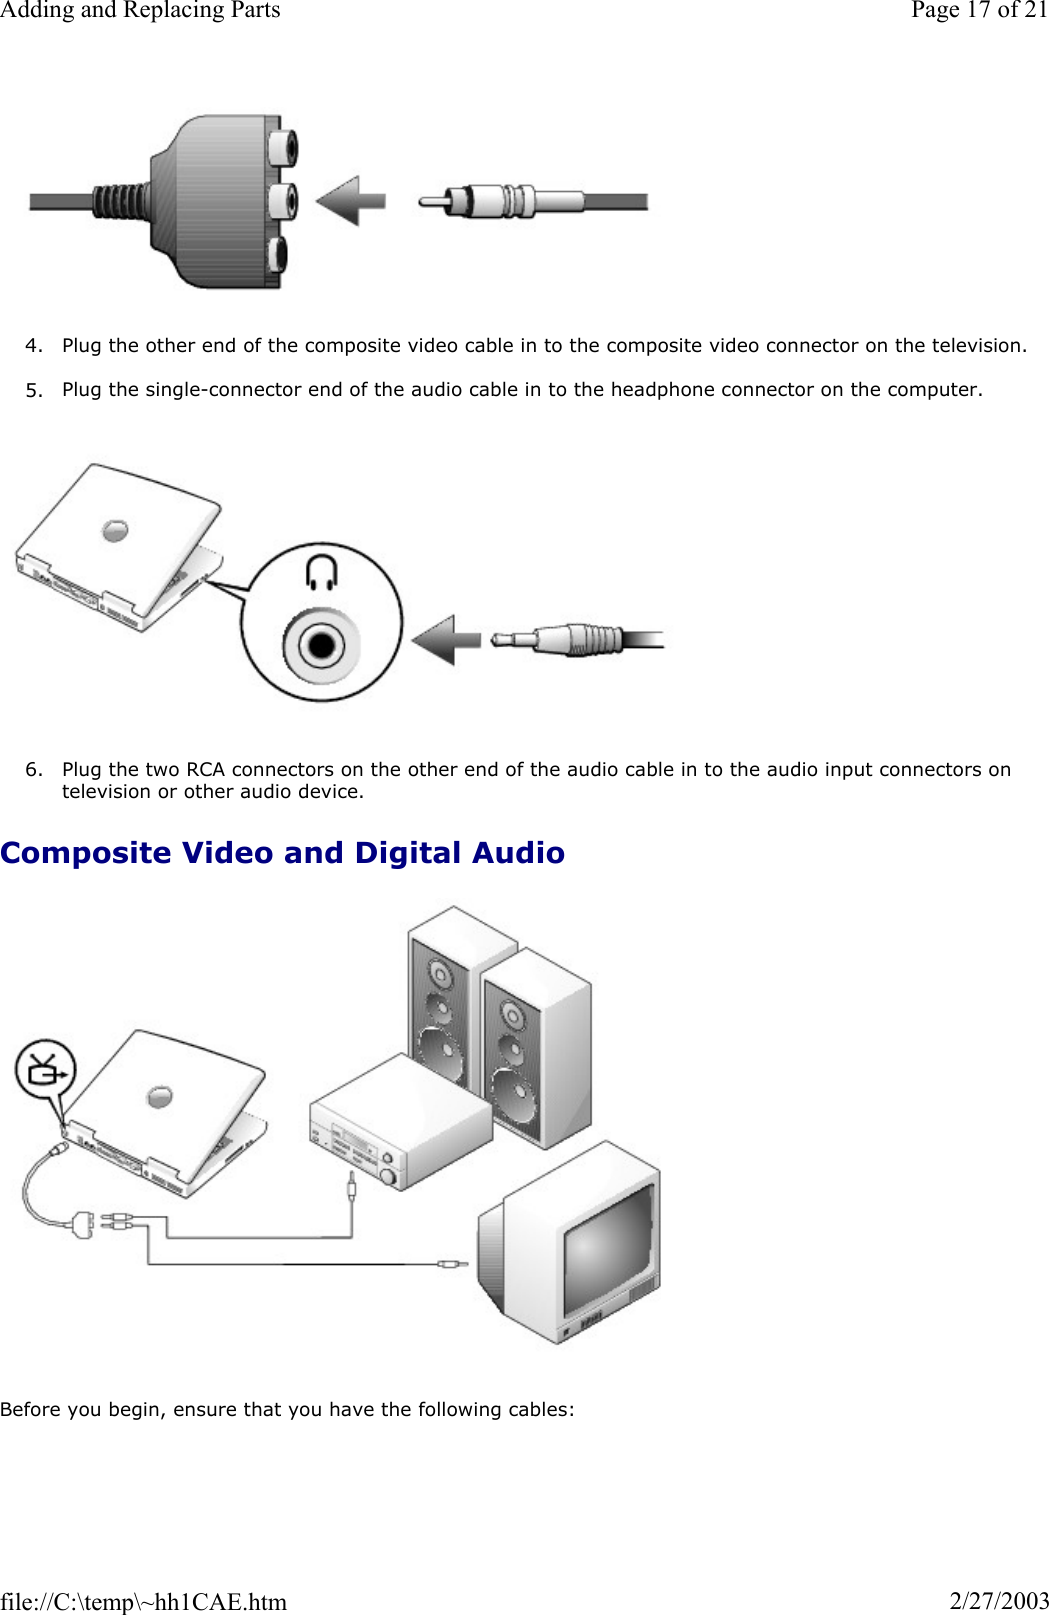 4. Plug the other end of the composite video cable in to the composite video connector on the television. 5. Plug the single-connector end of the audio cable in to the headphone connector on the computer.  6. Plug the two RCA connectors on the other end of the audio cable in to the audio input connectors on television or other audio device. Composite Video and Digital Audio Before you begin, ensure that you have the following cables: Page 17 of 21Adding and Replacing Parts2/27/2003file://C:\temp\~hh1CAE.htm